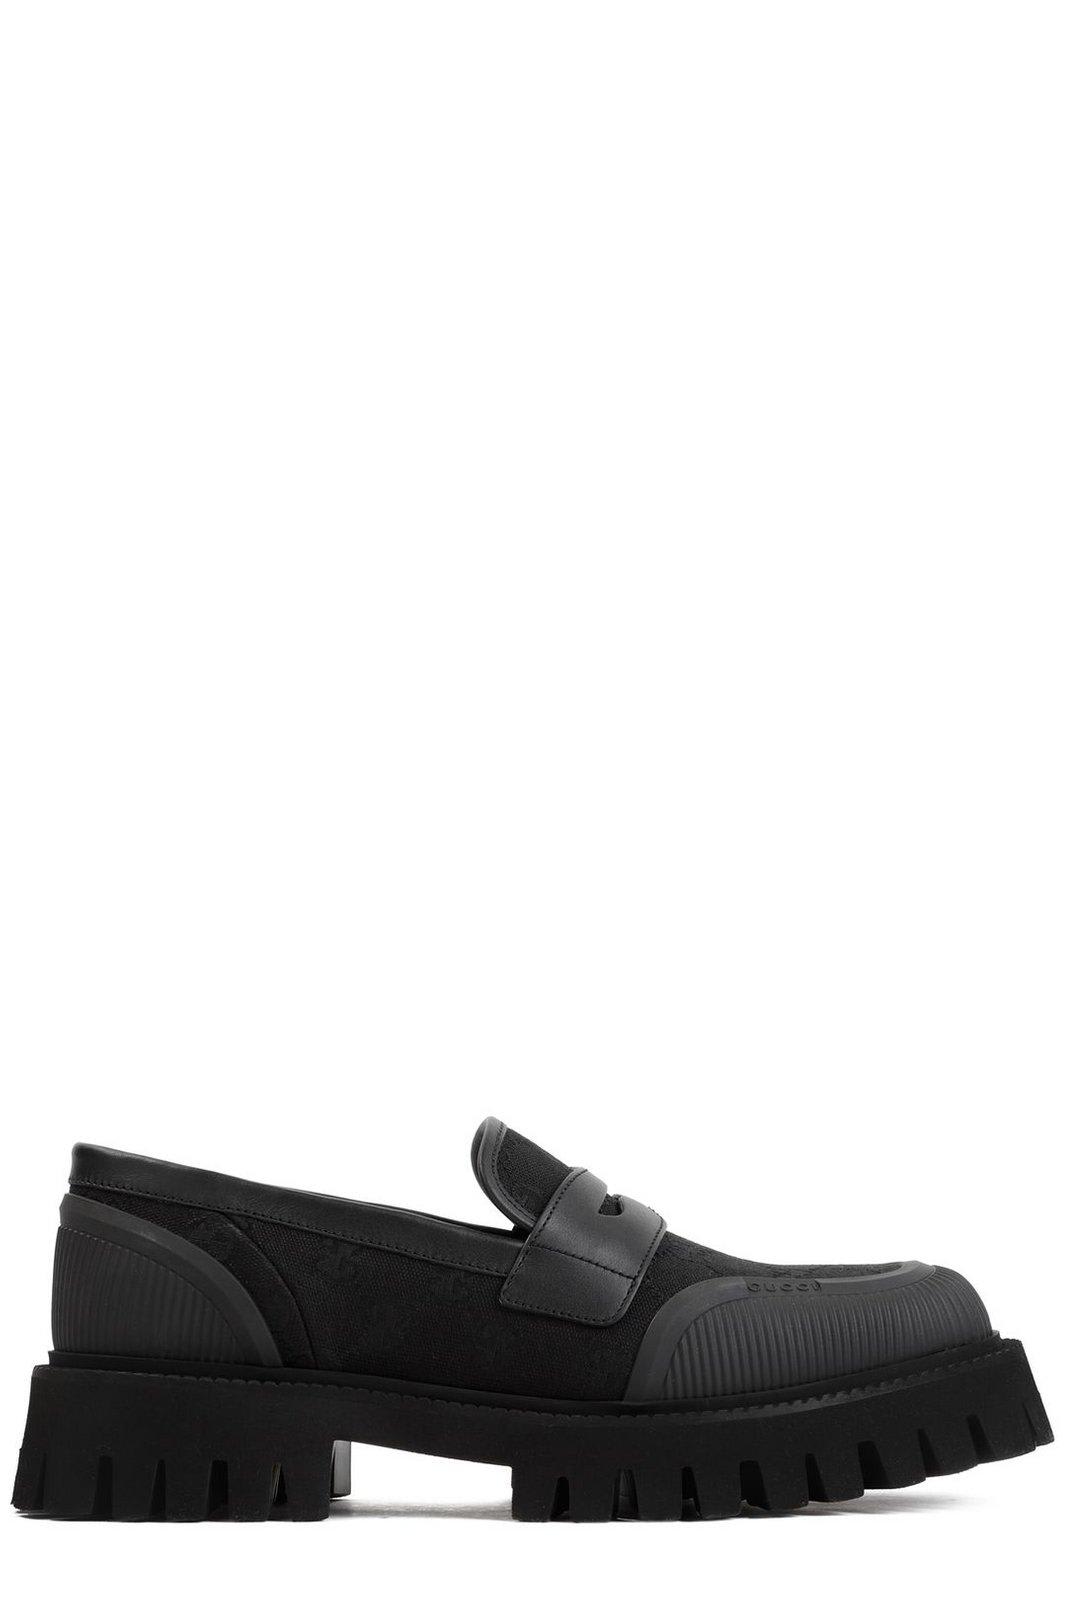 Shop Gucci Gg Supreme Chunky Sole Loafers